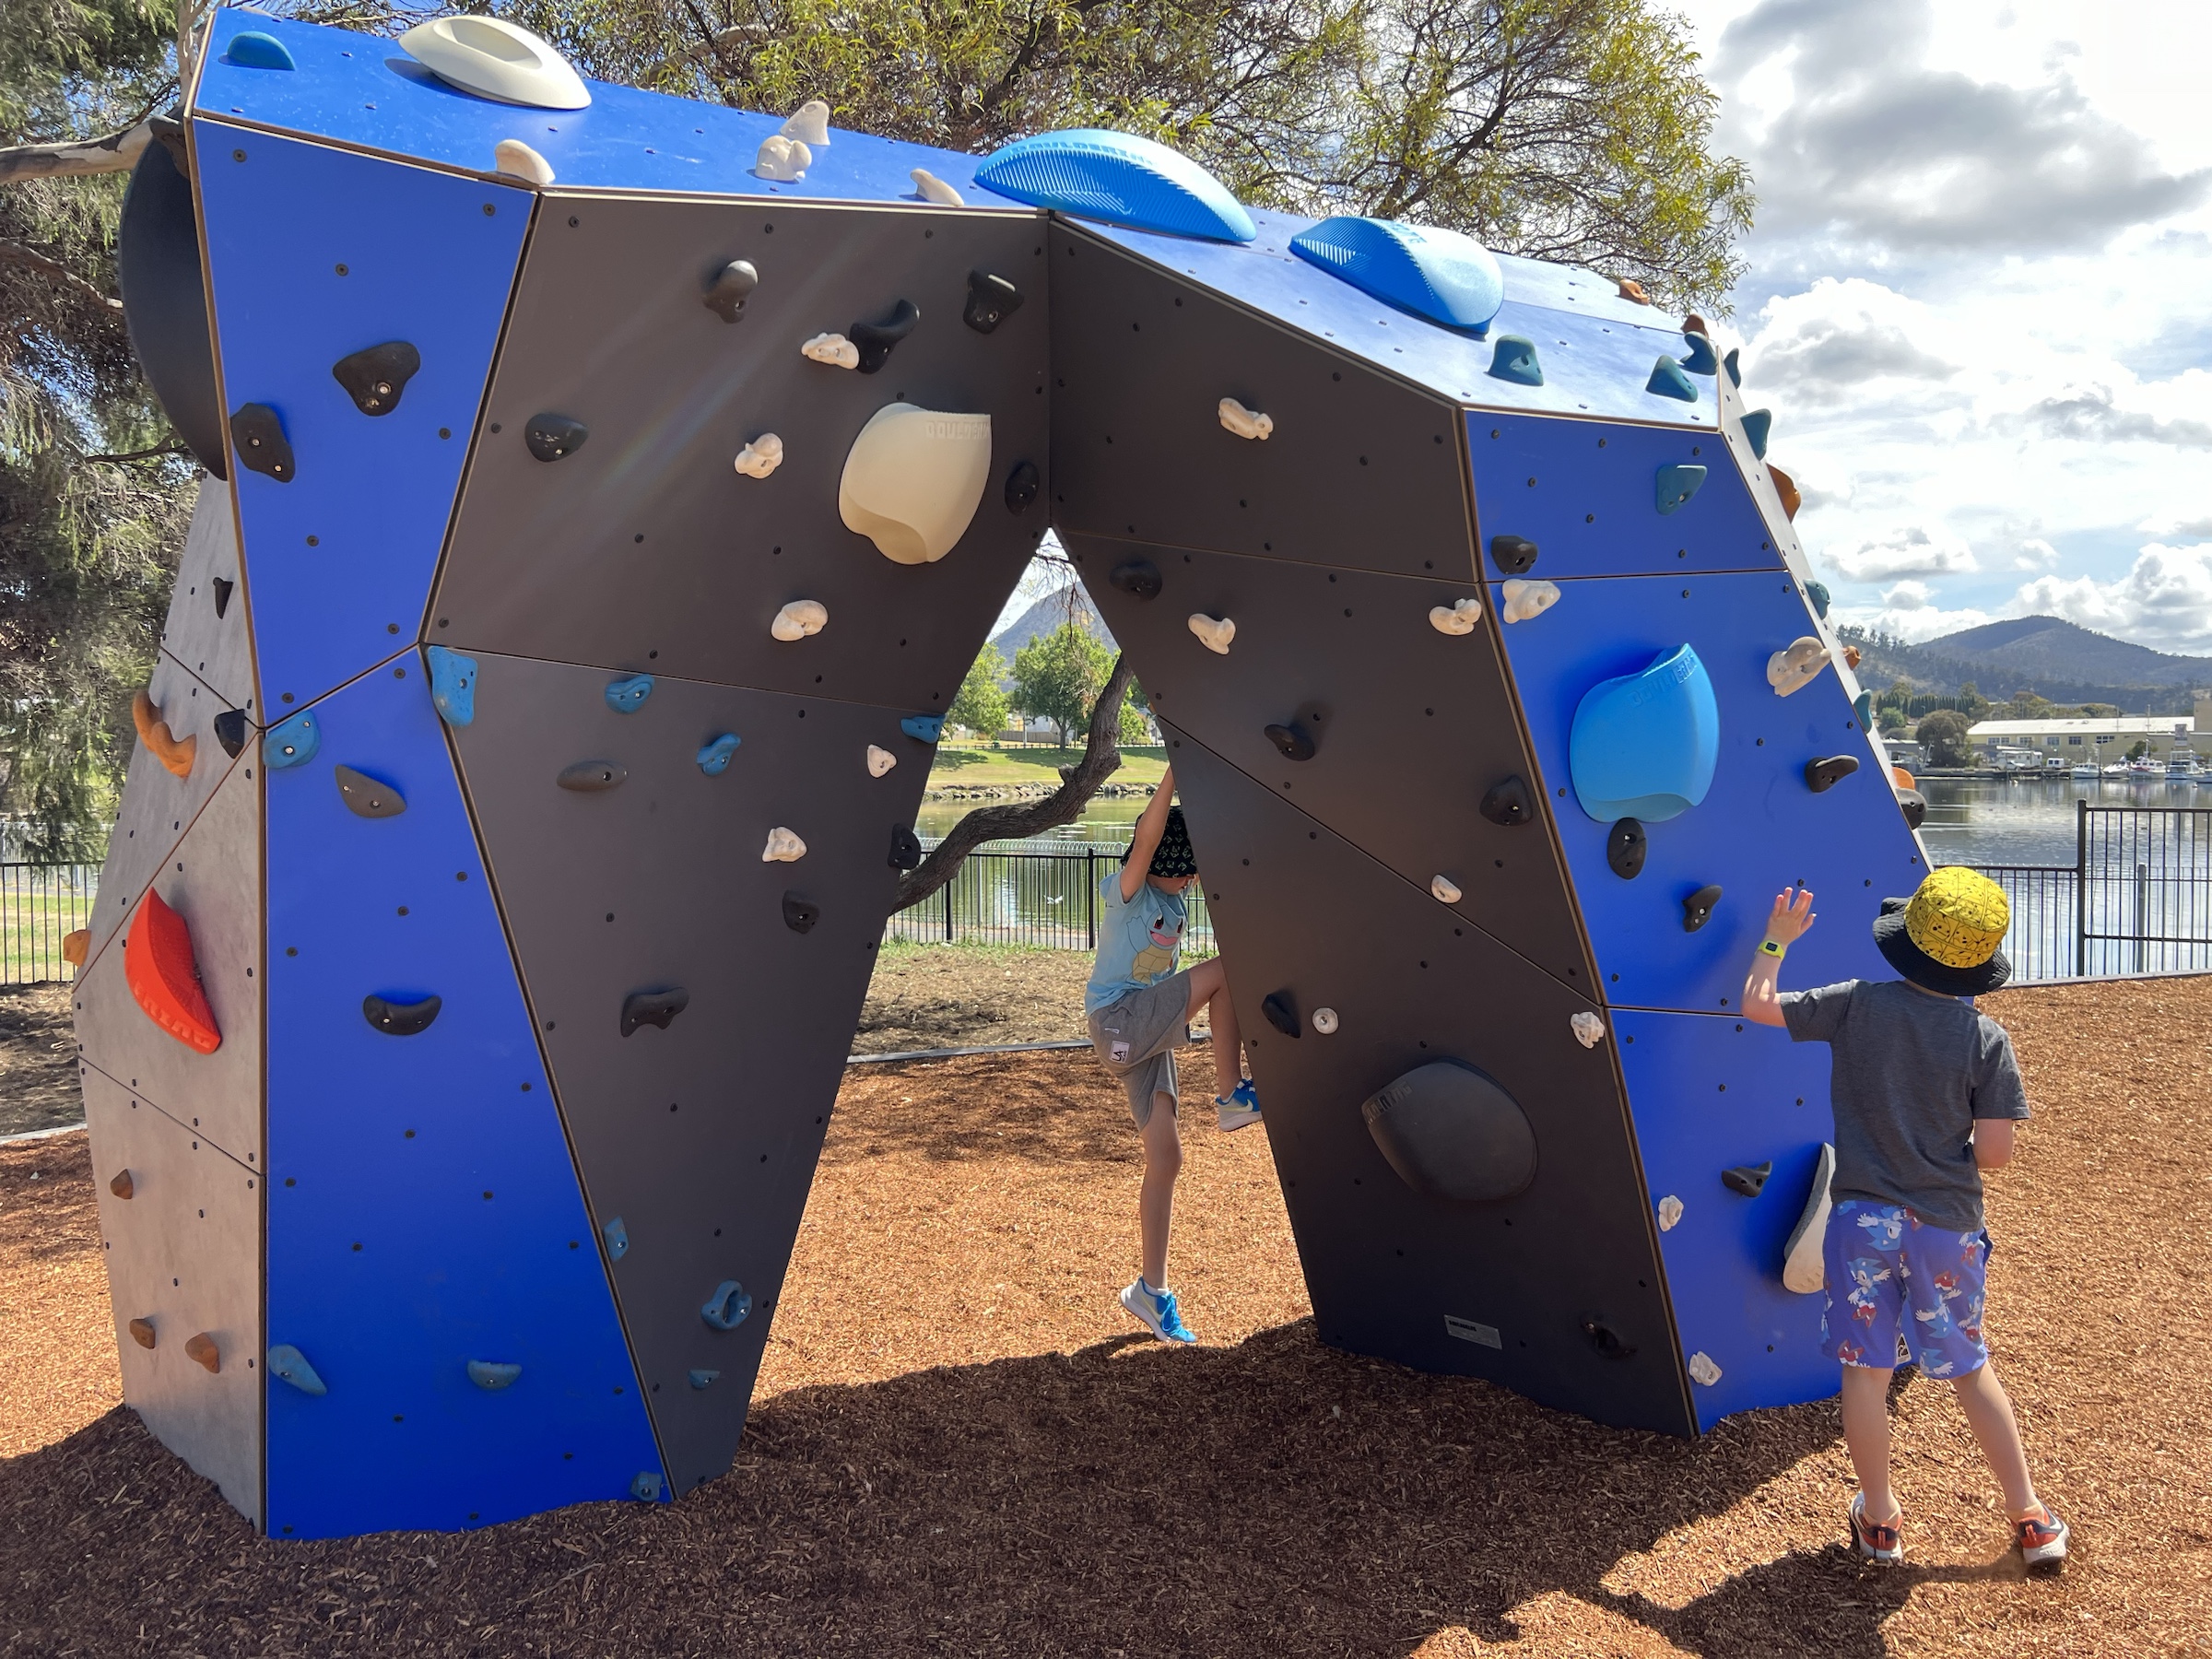 Eight Tassie playgrounds you may not have discovered yet